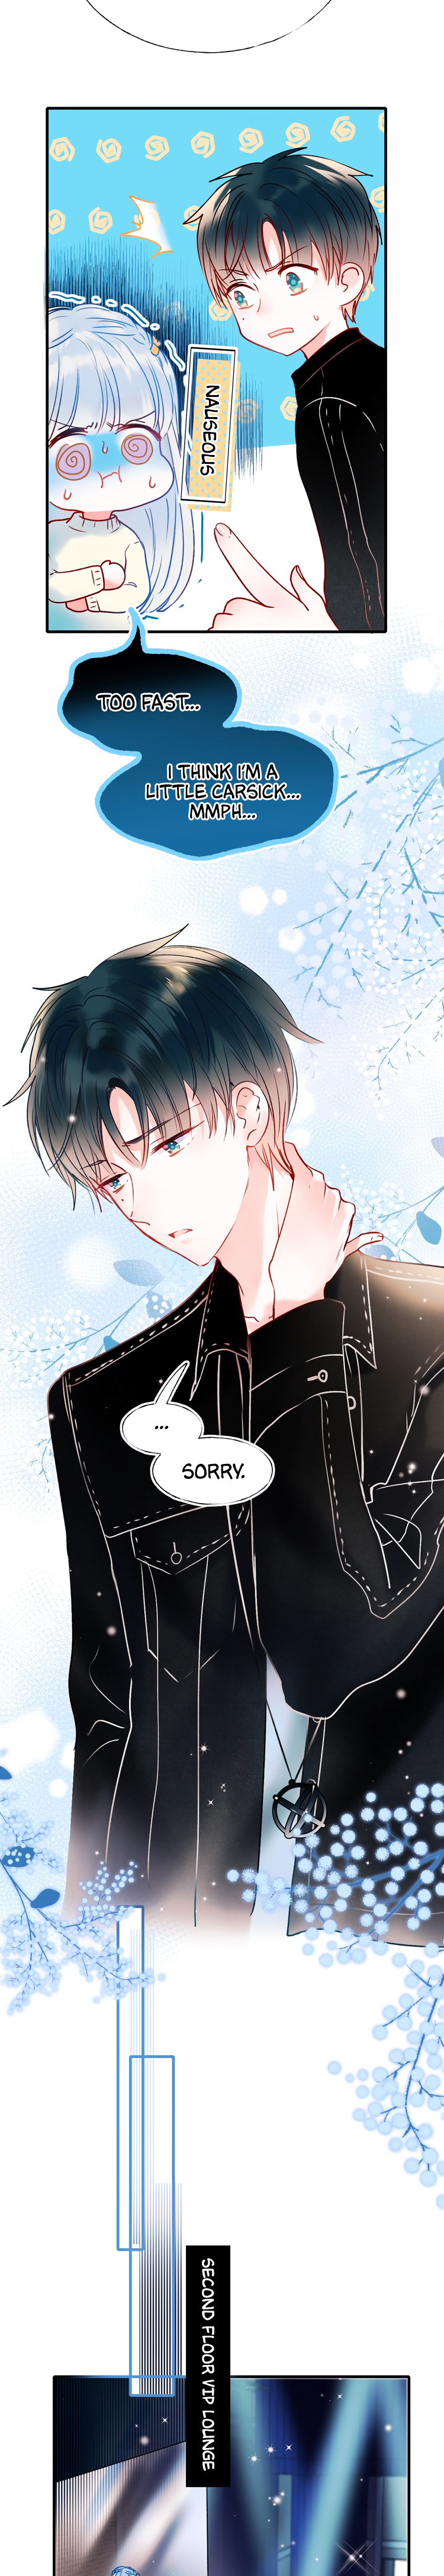 To Be Winner Ch. 46 offline discussion